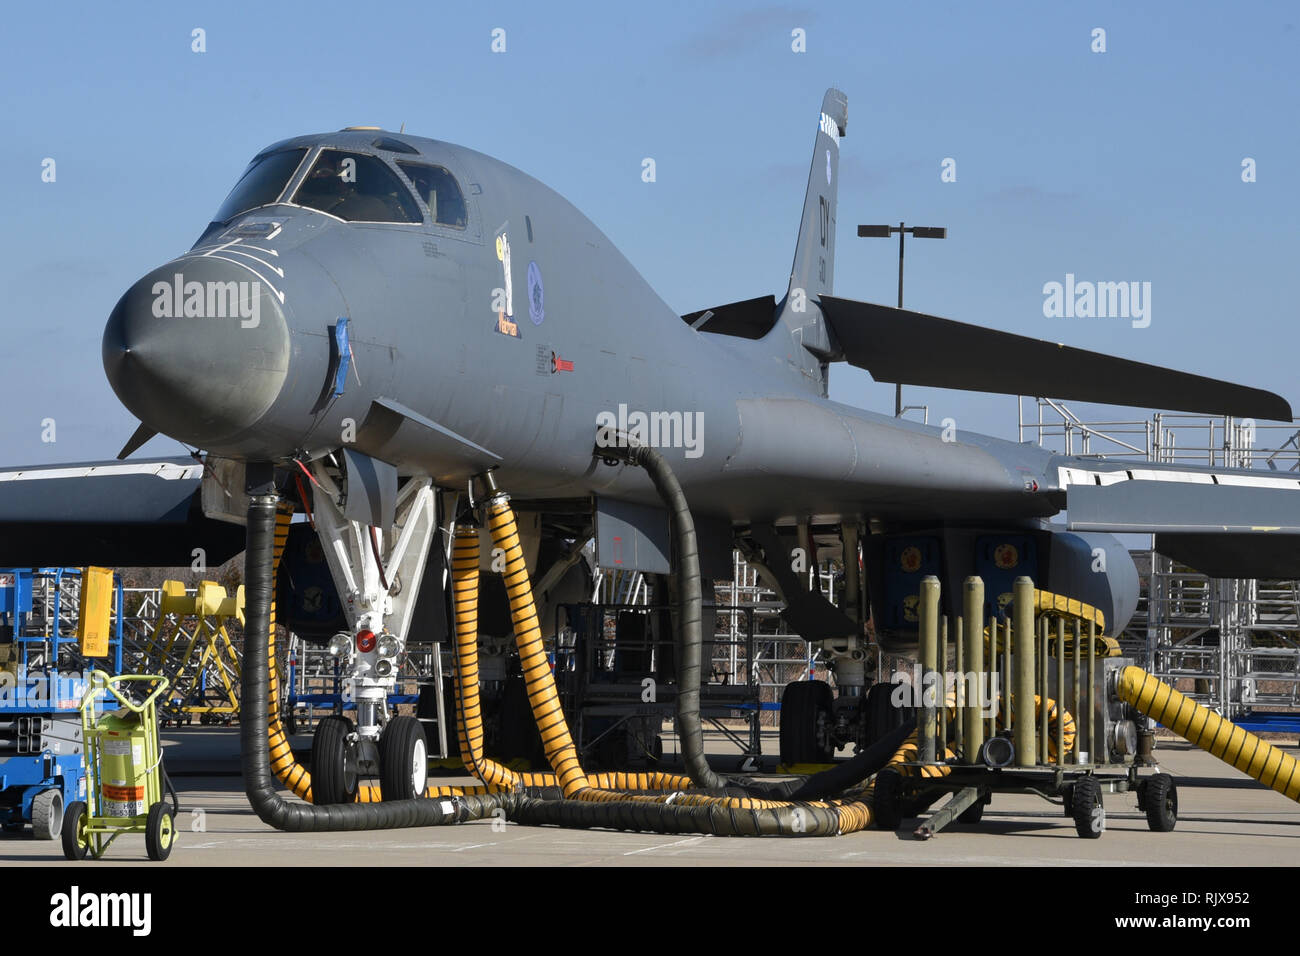 Boeing B-1B Lancer, serial # 86-0101, wearing 'Watchman' nose-art shown at the Maintenance, Repair and Overhaul Training Center with support equipment and hoses going to the aircraft as maintenance is conducted Jan. 17, 2019, Tinker Air Force Base, Oklahoma. MROTC is a facility used for heavy aircraft maintenance in a public/private partnership between the Air Force and Boeing. (U.S. Air Force photo/Greg L. Davis) Stock Photo